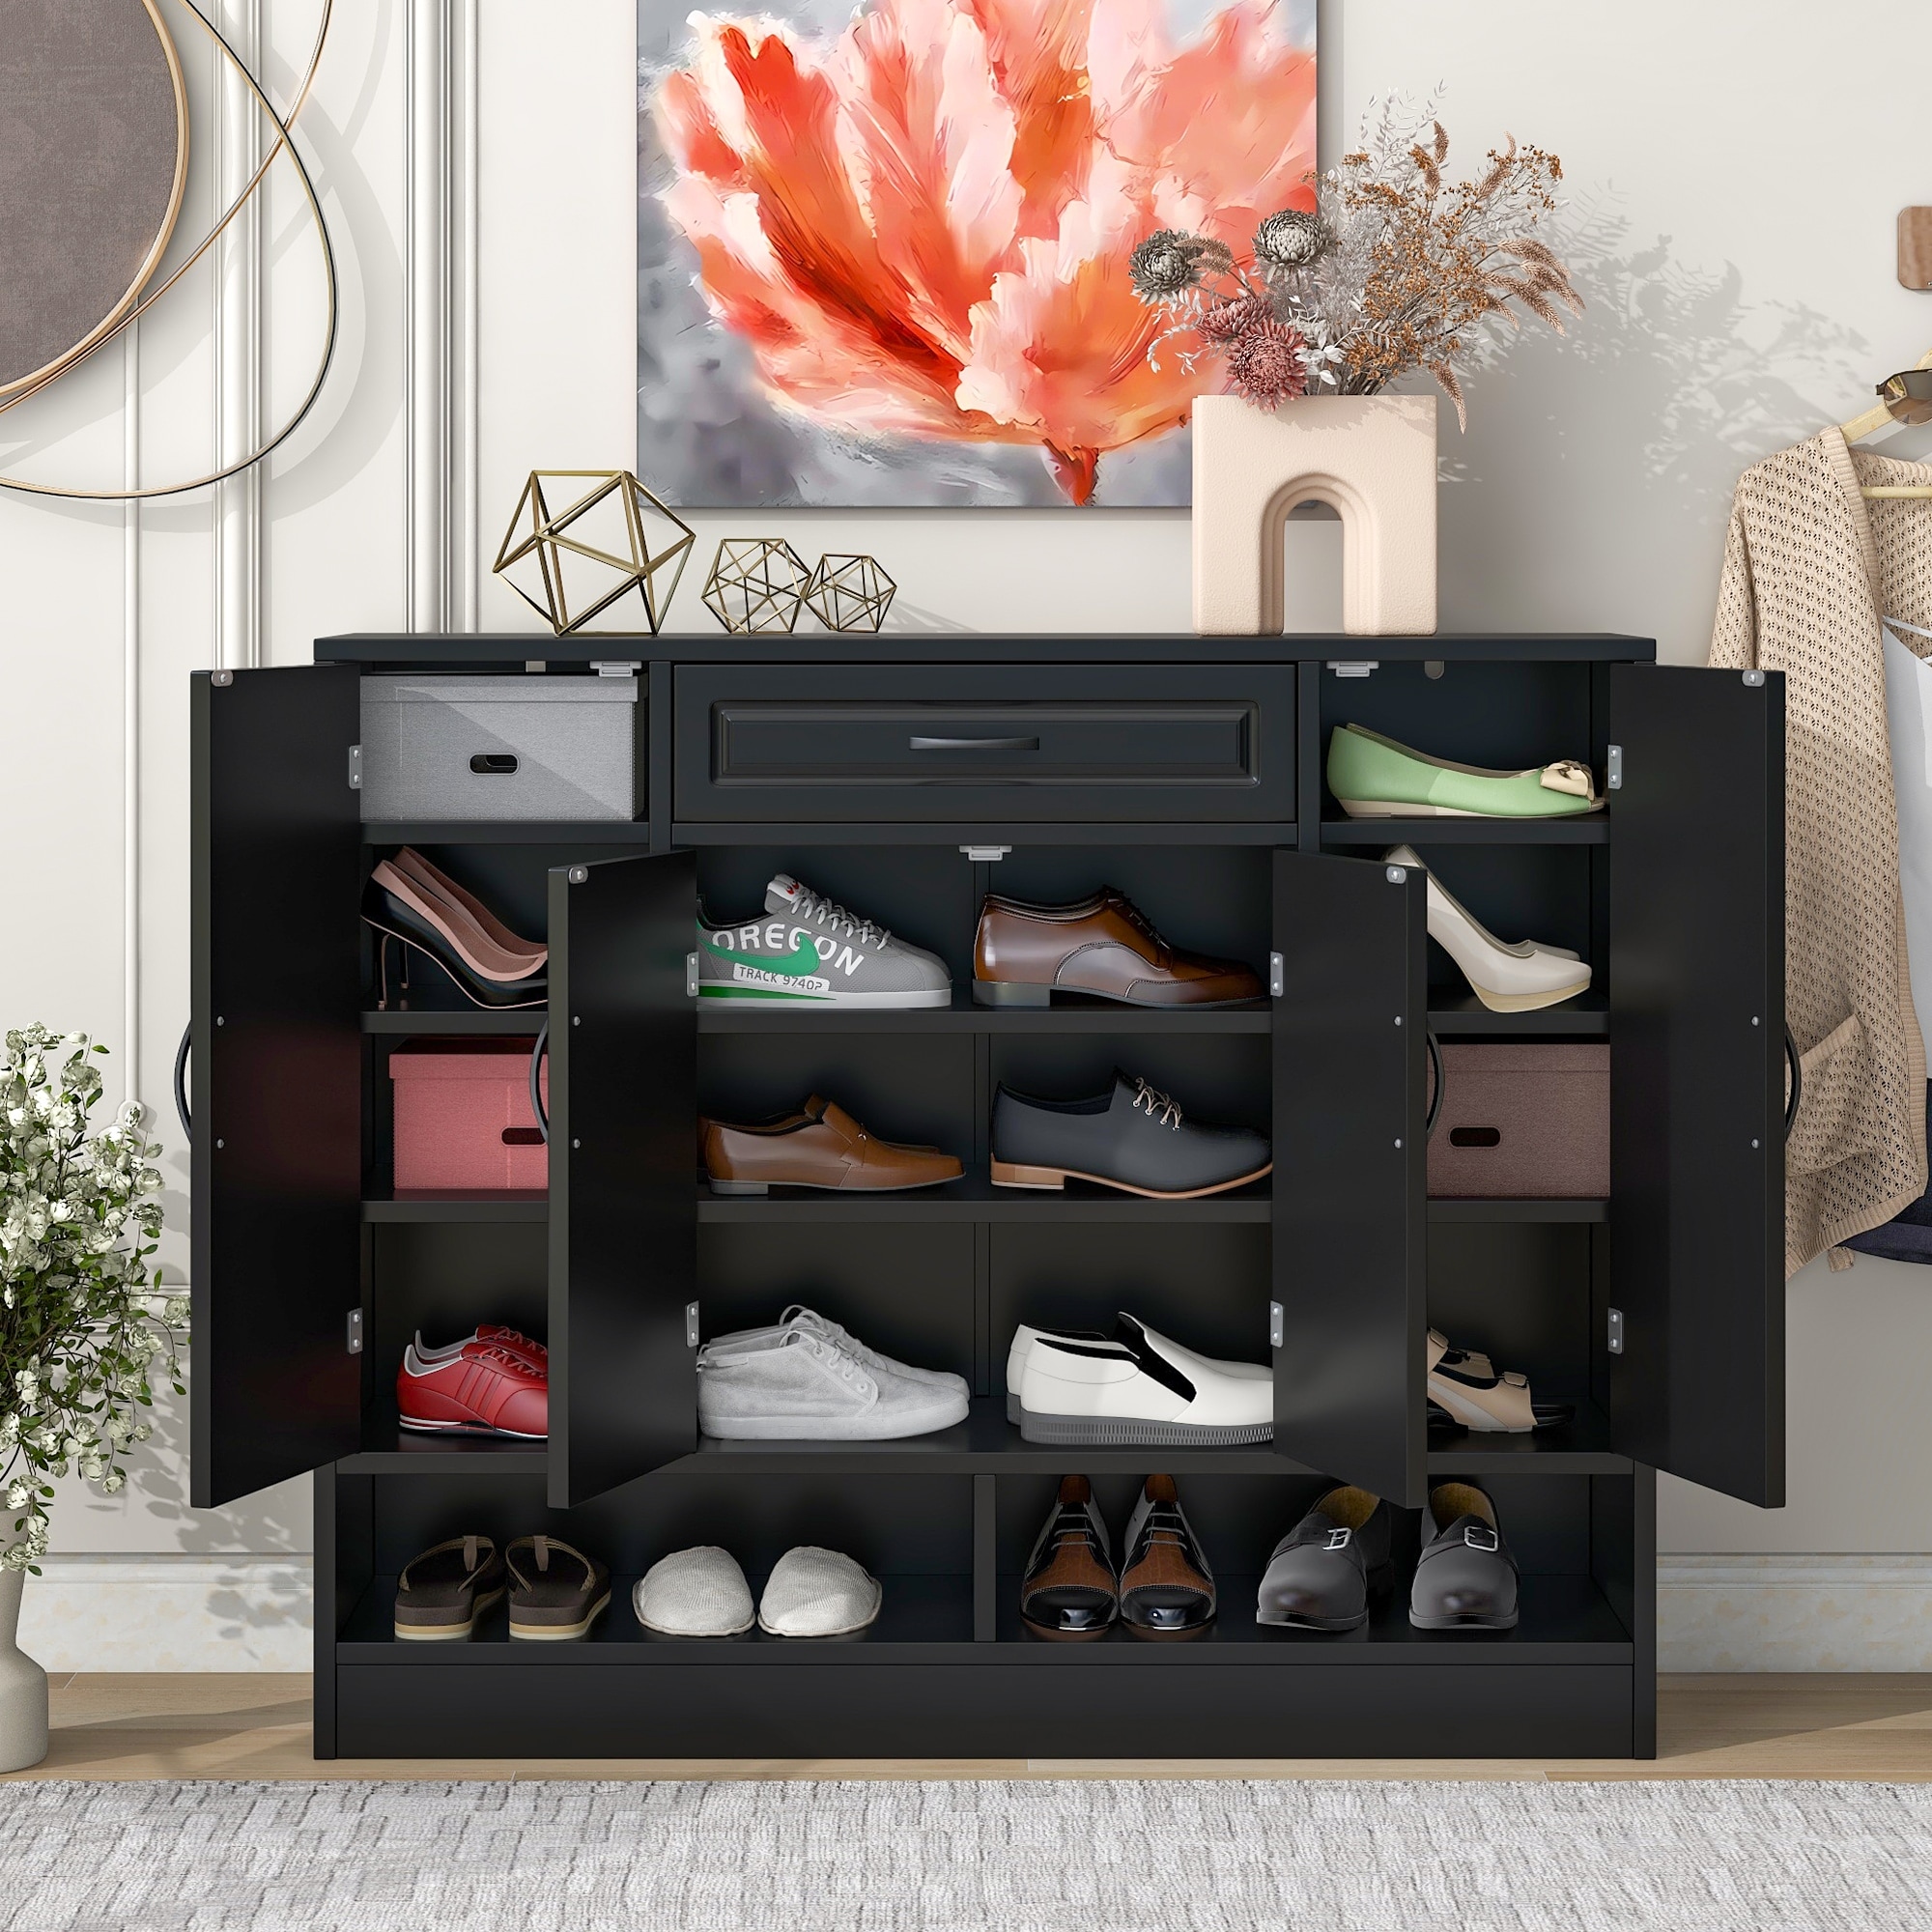 https://ak1.ostkcdn.com/images/products/is/images/direct/8ede79121eec59b522d7a9c14f53575d93a53a49/Shoe-Cabinet-for-Entryway%2C-Modern-Free-Standing-Shoe-Storage-Cabinets%2C-Shoe-Organizer-Cabinet-with-Adjustable-Shelves.jpg